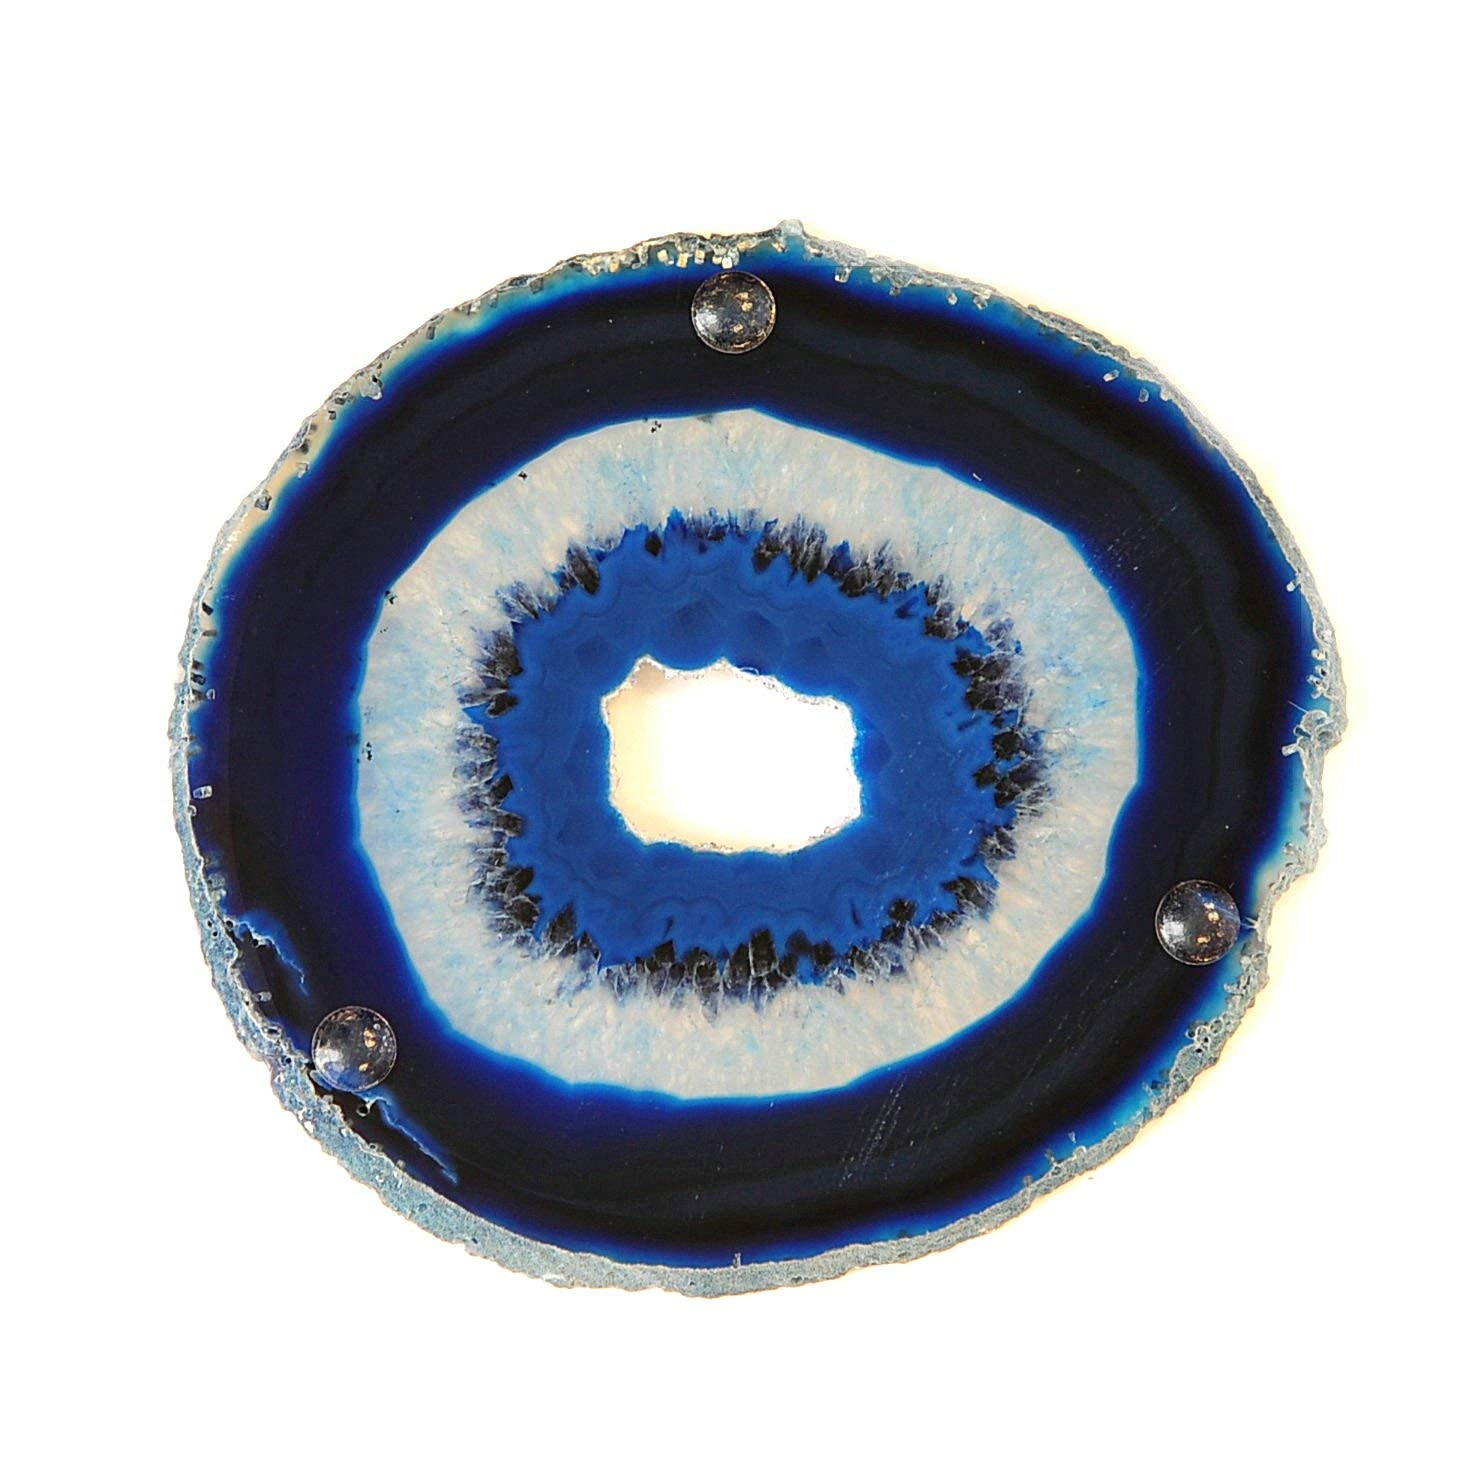 marquis by waterford sparkle 9 vase of amazon com extra blue 4 5 natural agate coaster with rubber with amazon com extra blue 4 5 natural agate coaster with rubber bumper set of 4 by jic gem coasters